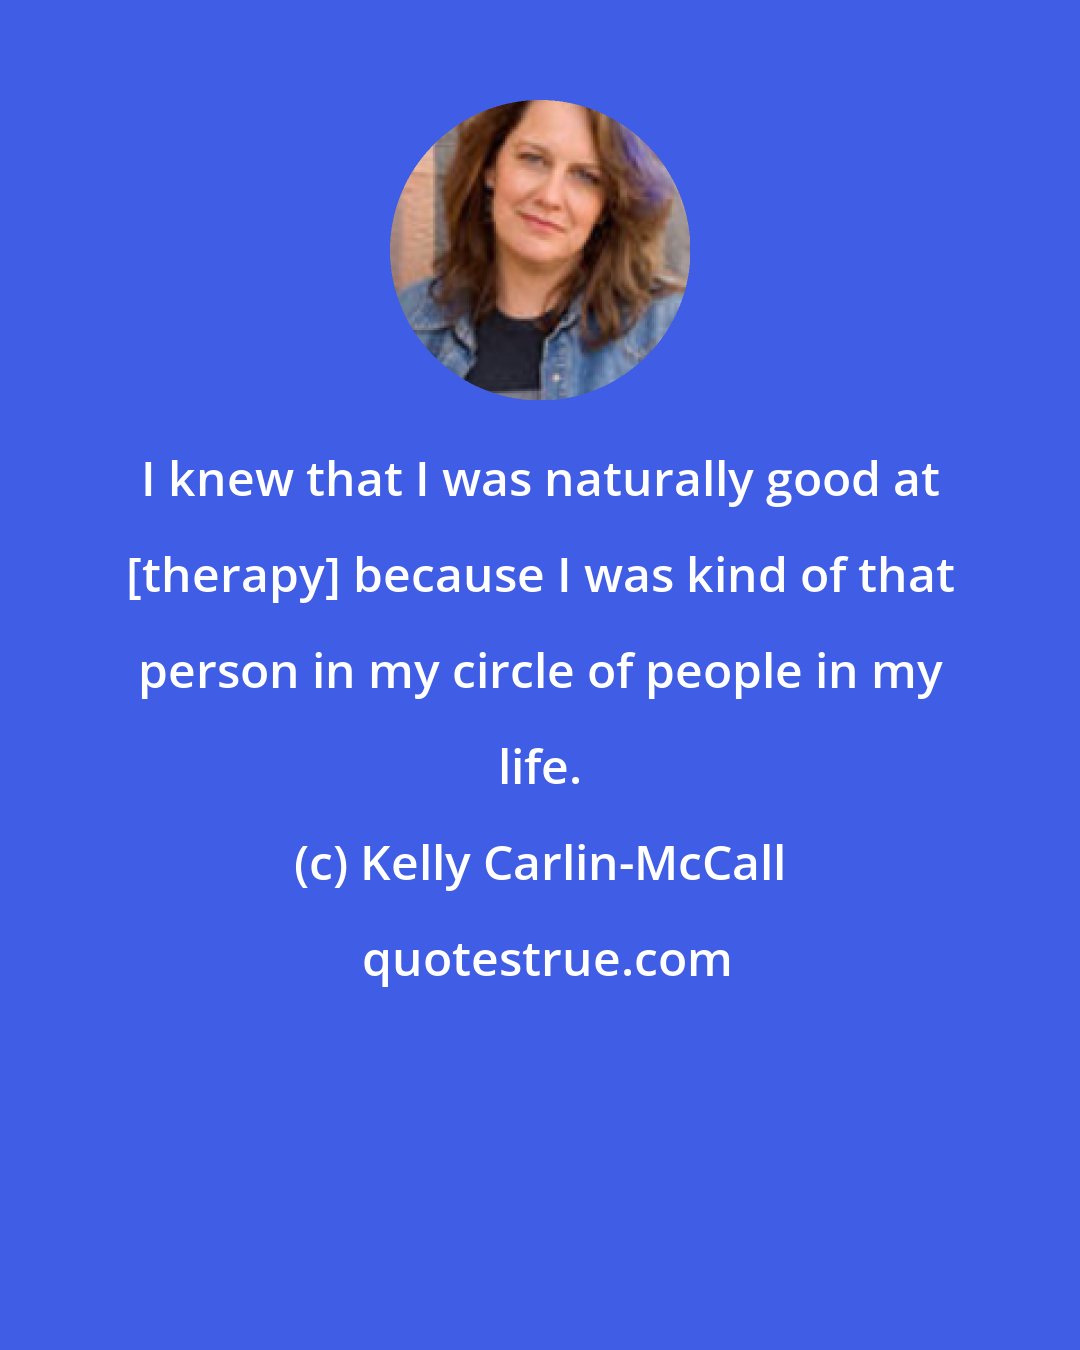 Kelly Carlin-McCall: I knew that I was naturally good at [therapy] because I was kind of that person in my circle of people in my life.